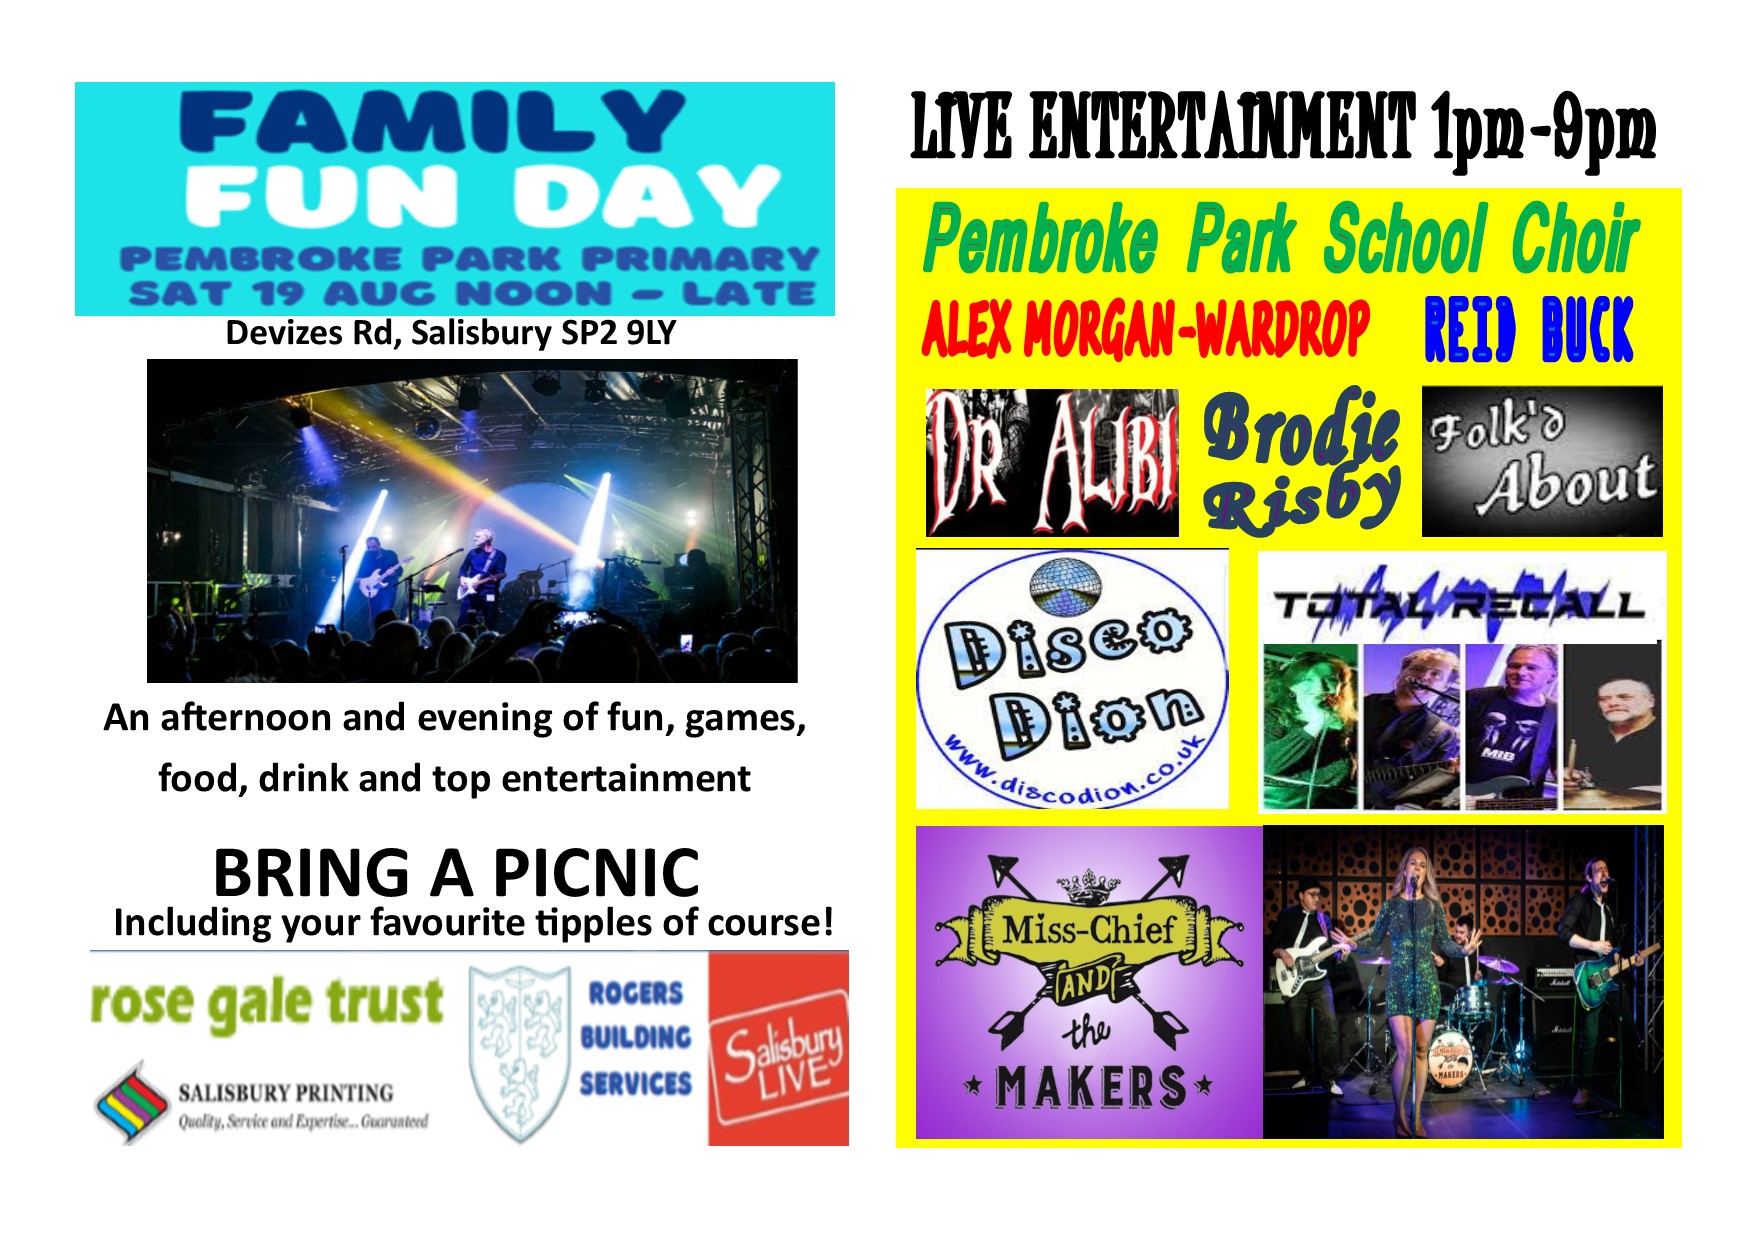 Family Fun Day: Mischief & The Makers + Total Recall + Brodie Risby + Folk'd About + Dr Alibi + Disco Dion + Alex Morgan-Wardrop + Reid Buck